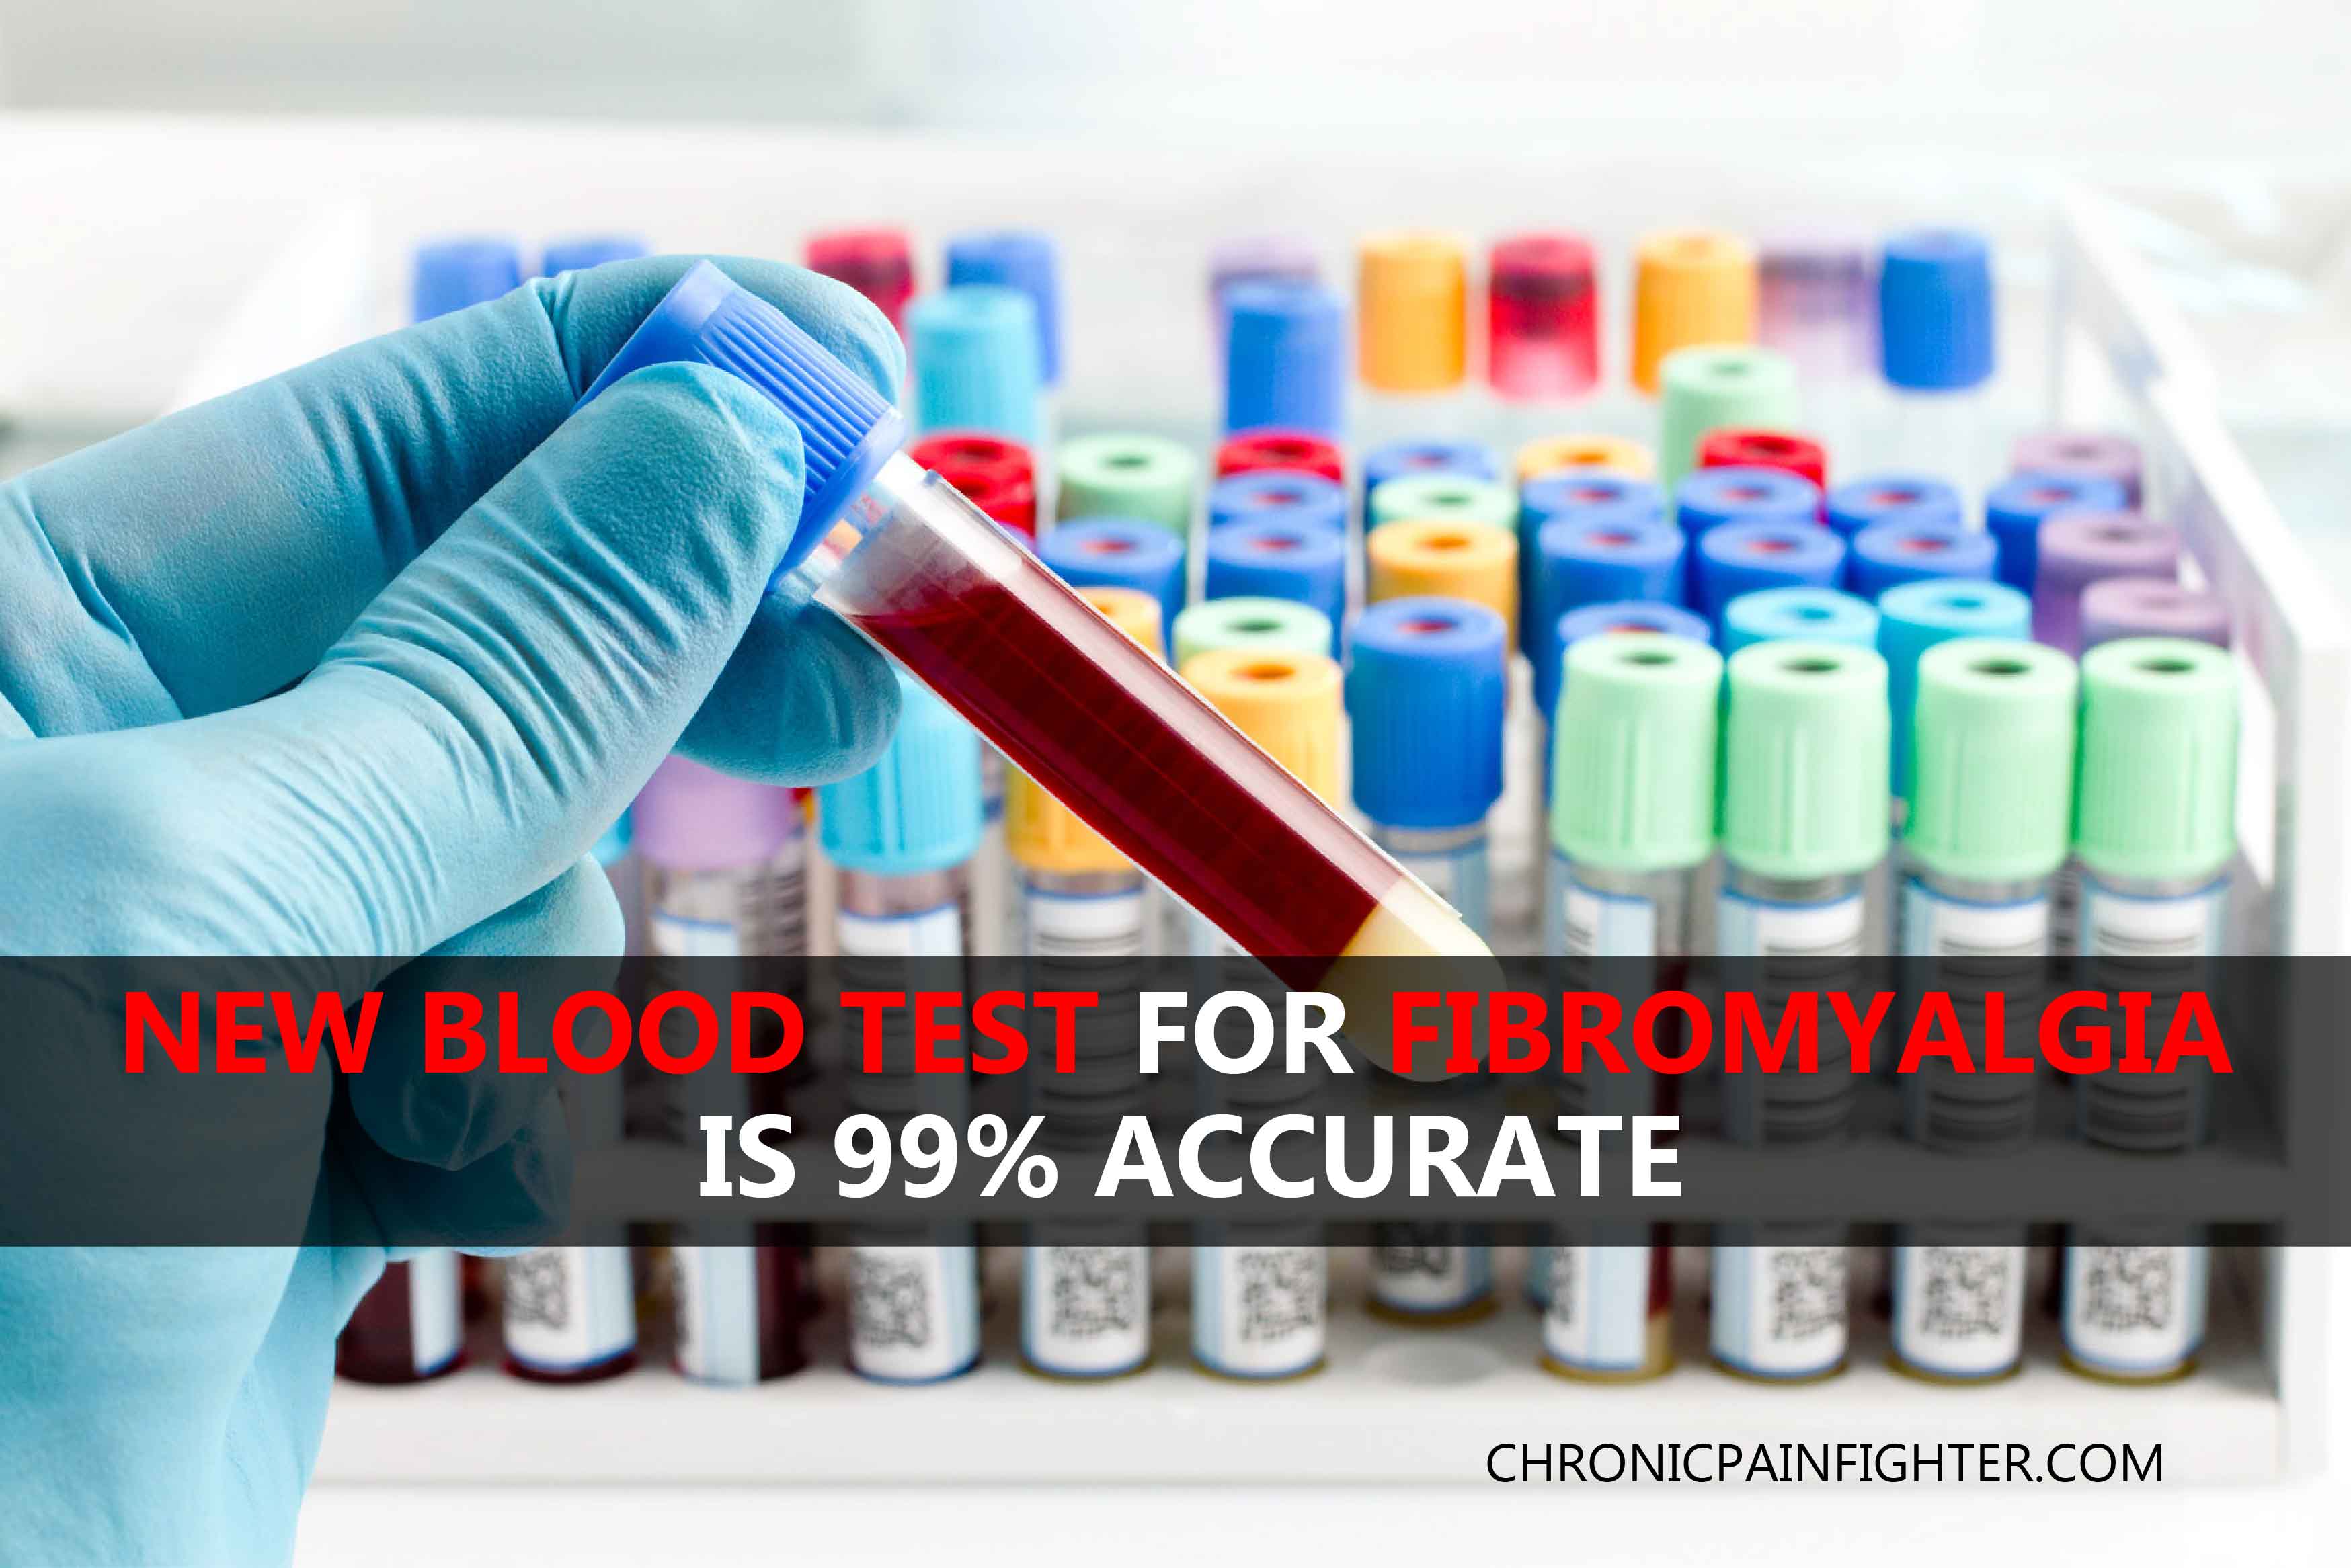 New Blood Test for Fibromyalgia Is 99% Accurate